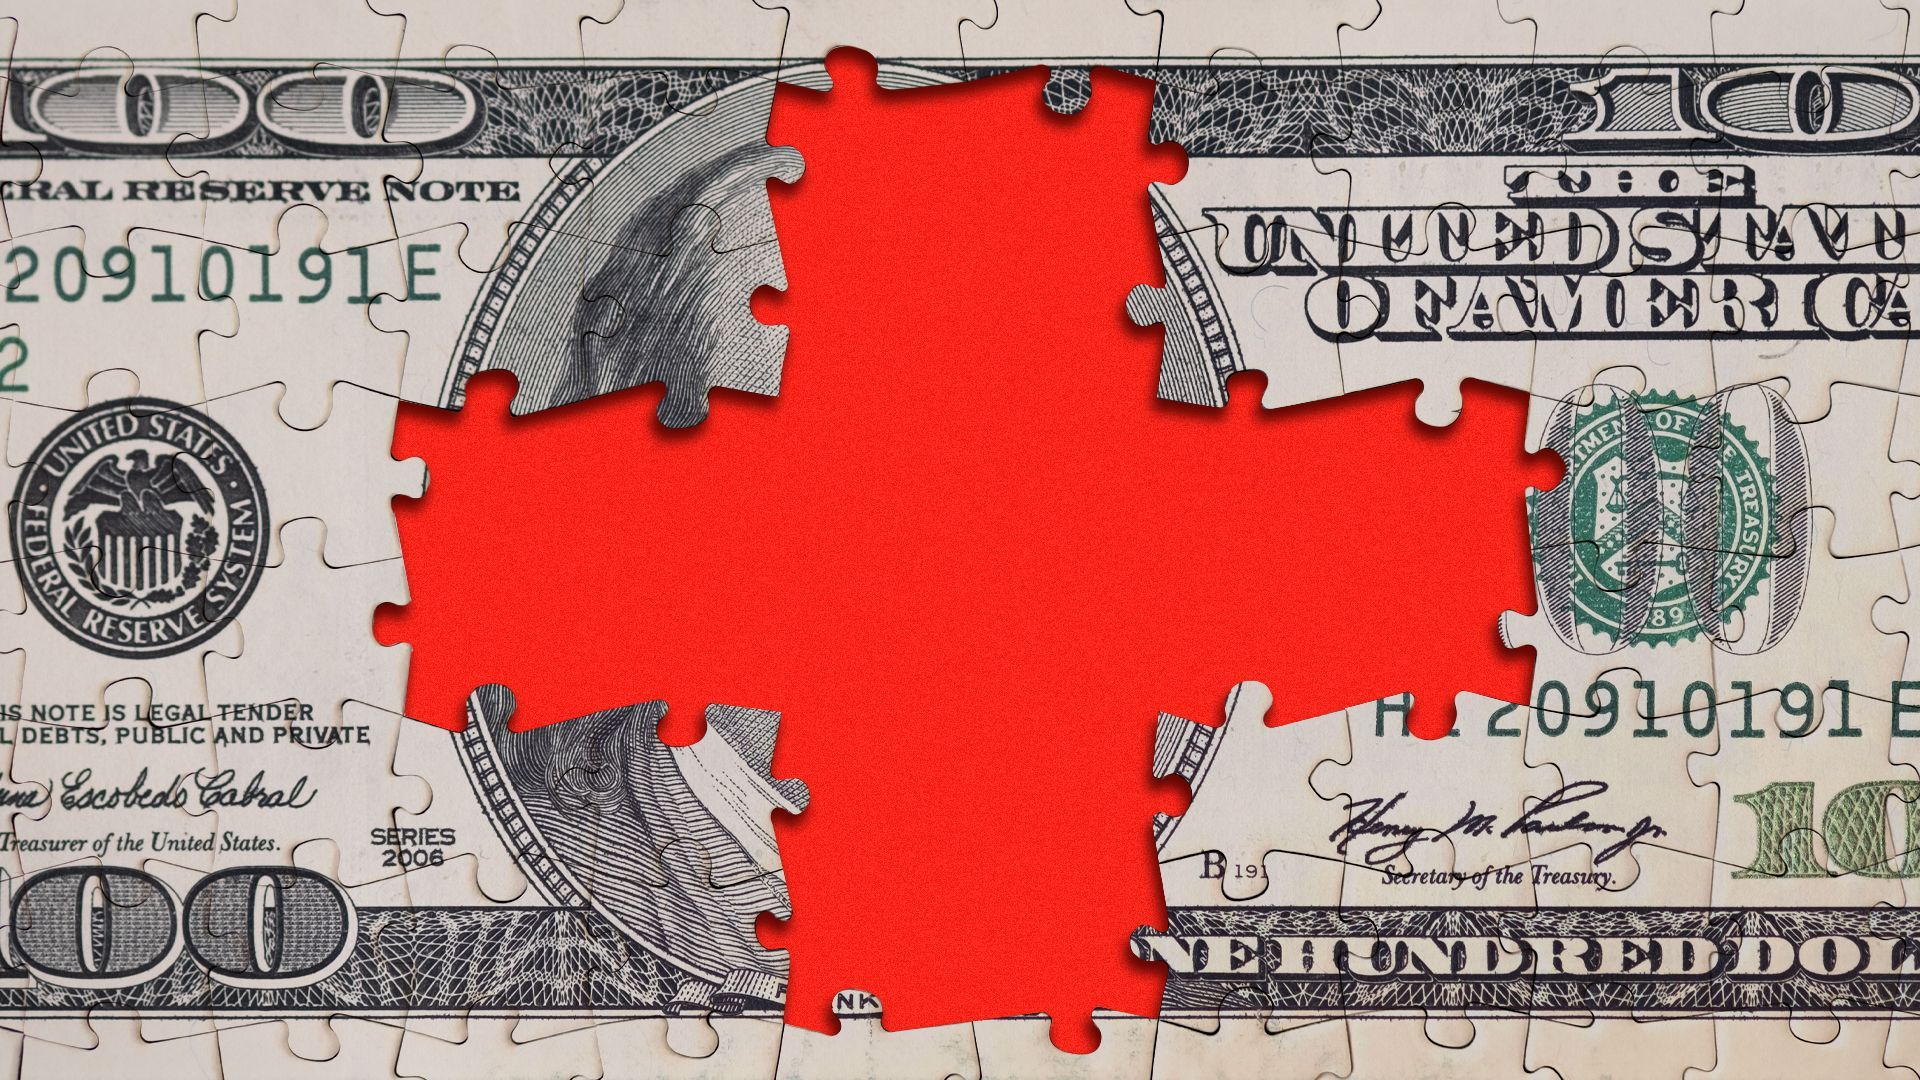 Illustration of a hundred dollar bill puzzle with pieces missing out of the center in the shape of a red cross